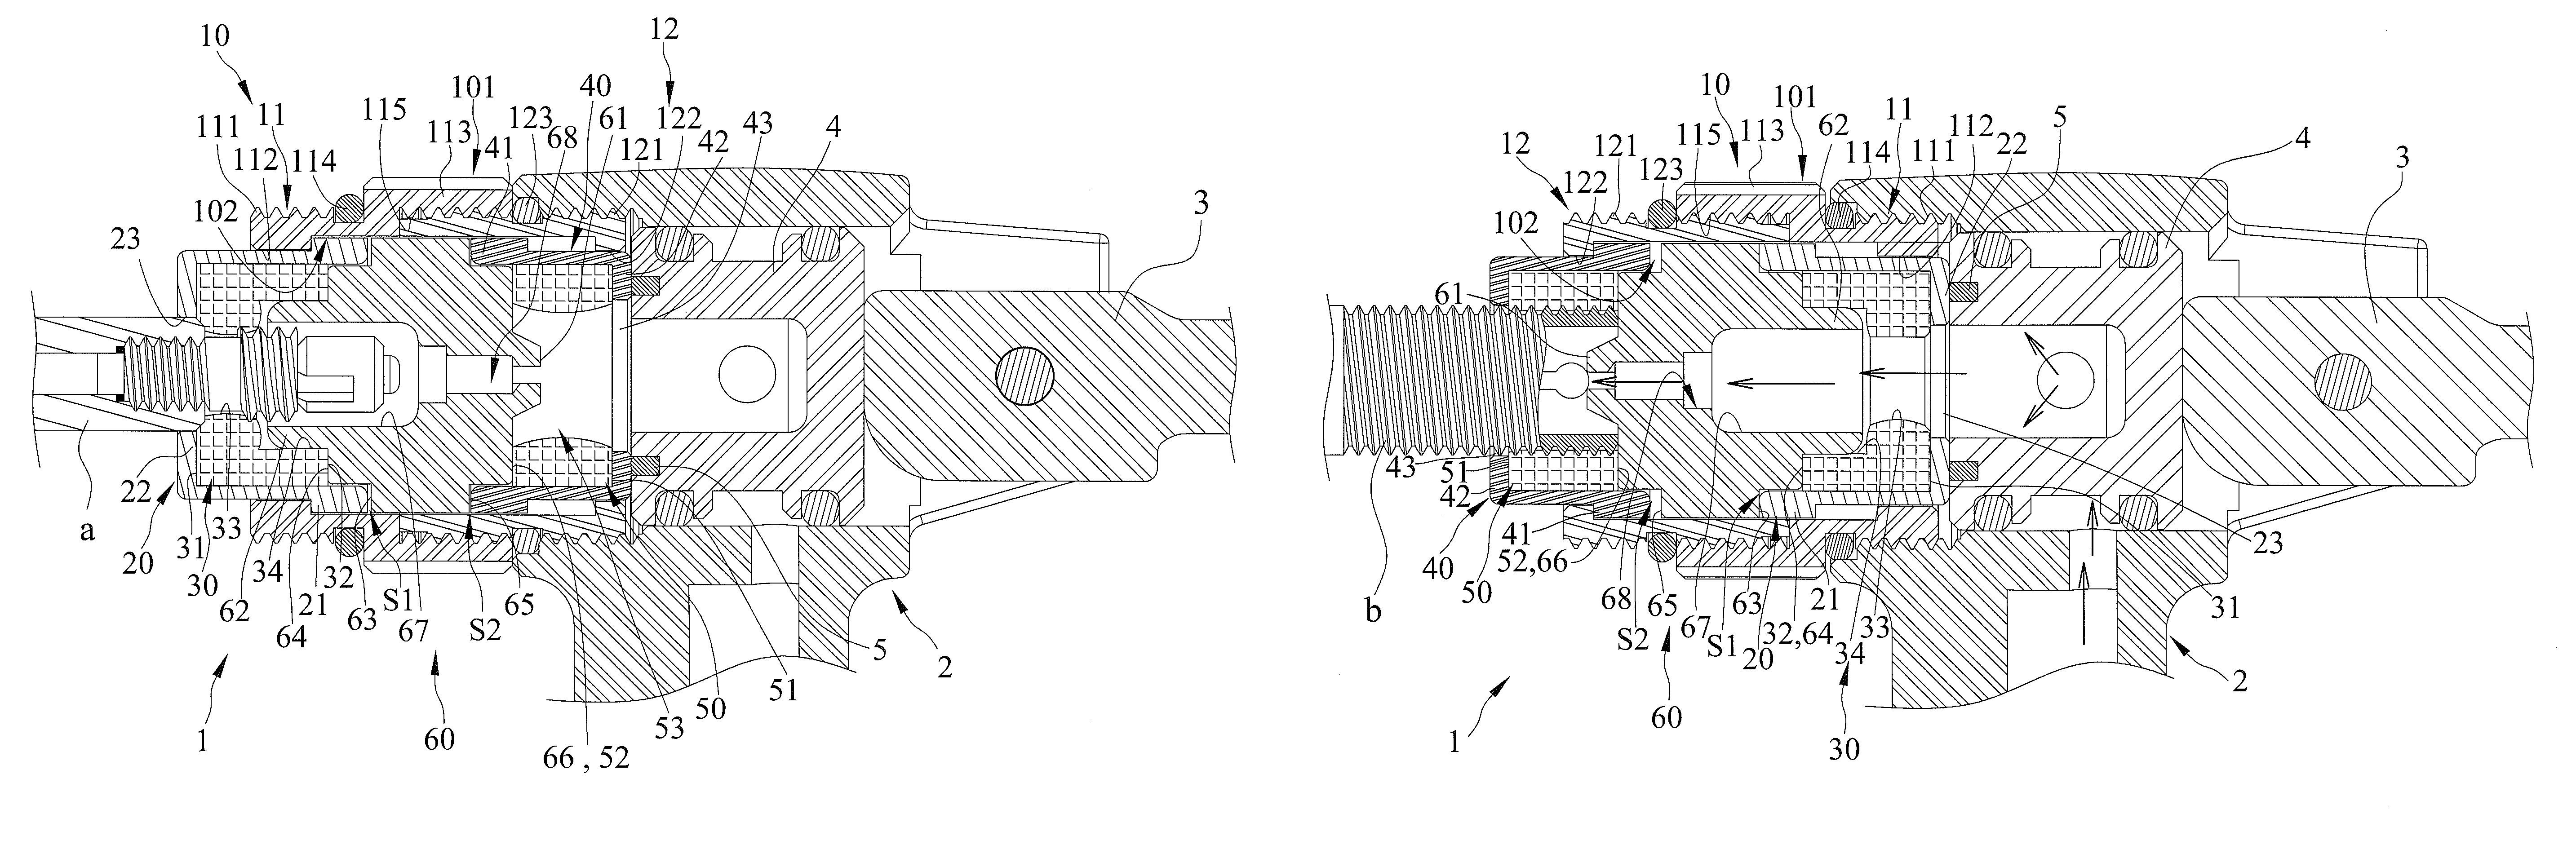 Air valve connector for connecting different valves